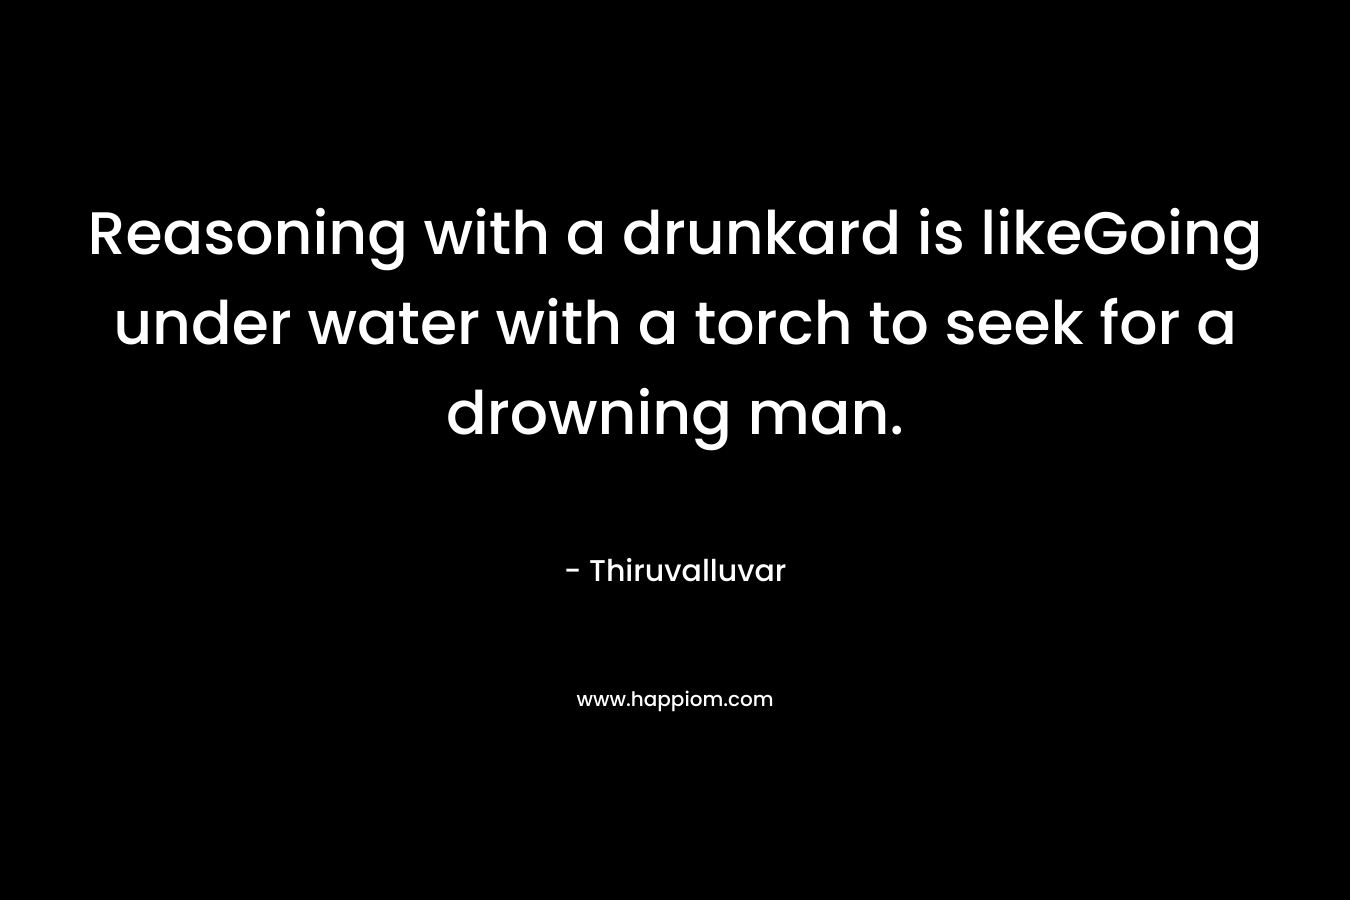 Reasoning with a drunkard is likeGoing under water with a torch to seek for a drowning man. – Thiruvalluvar